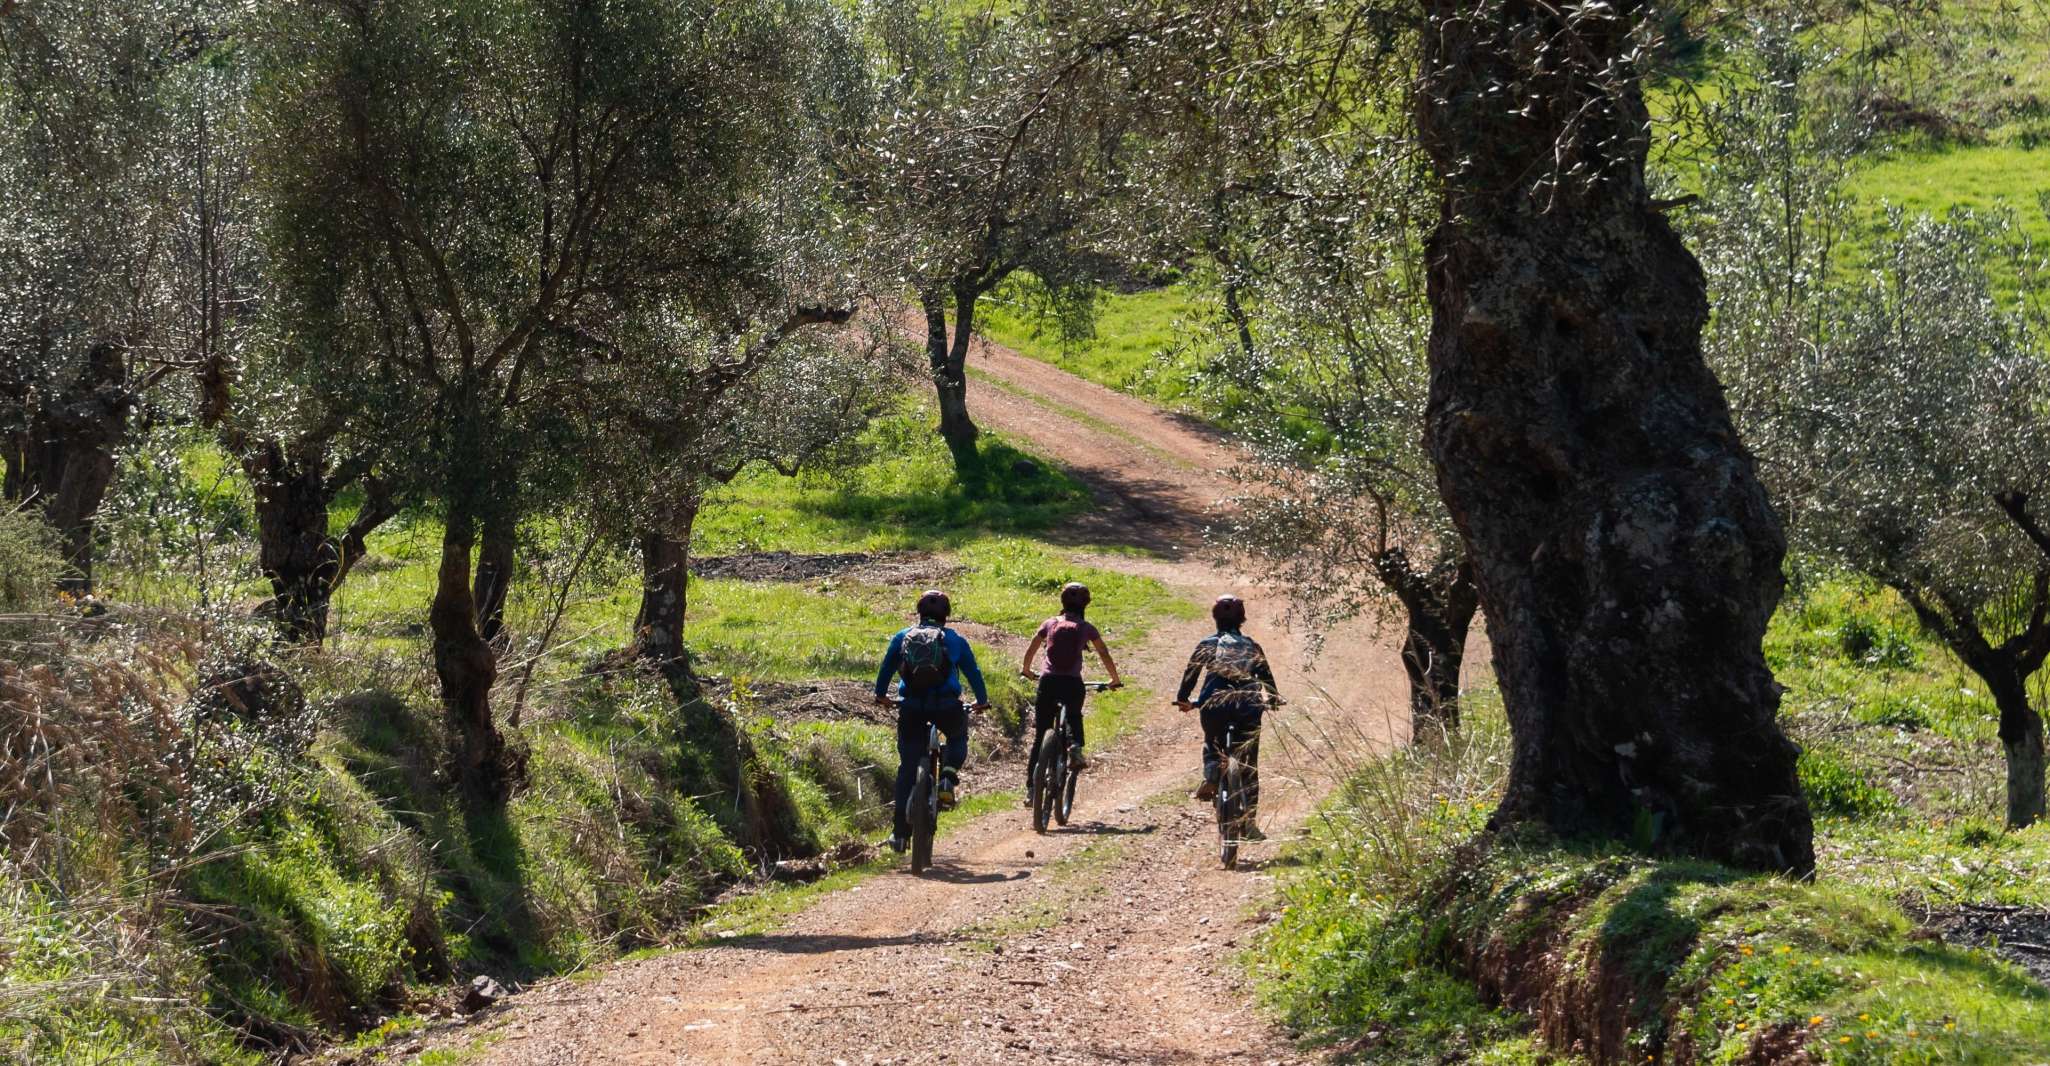 Ancient Messene, E-Bike Tour with Monastery Visit and Picnic - Housity